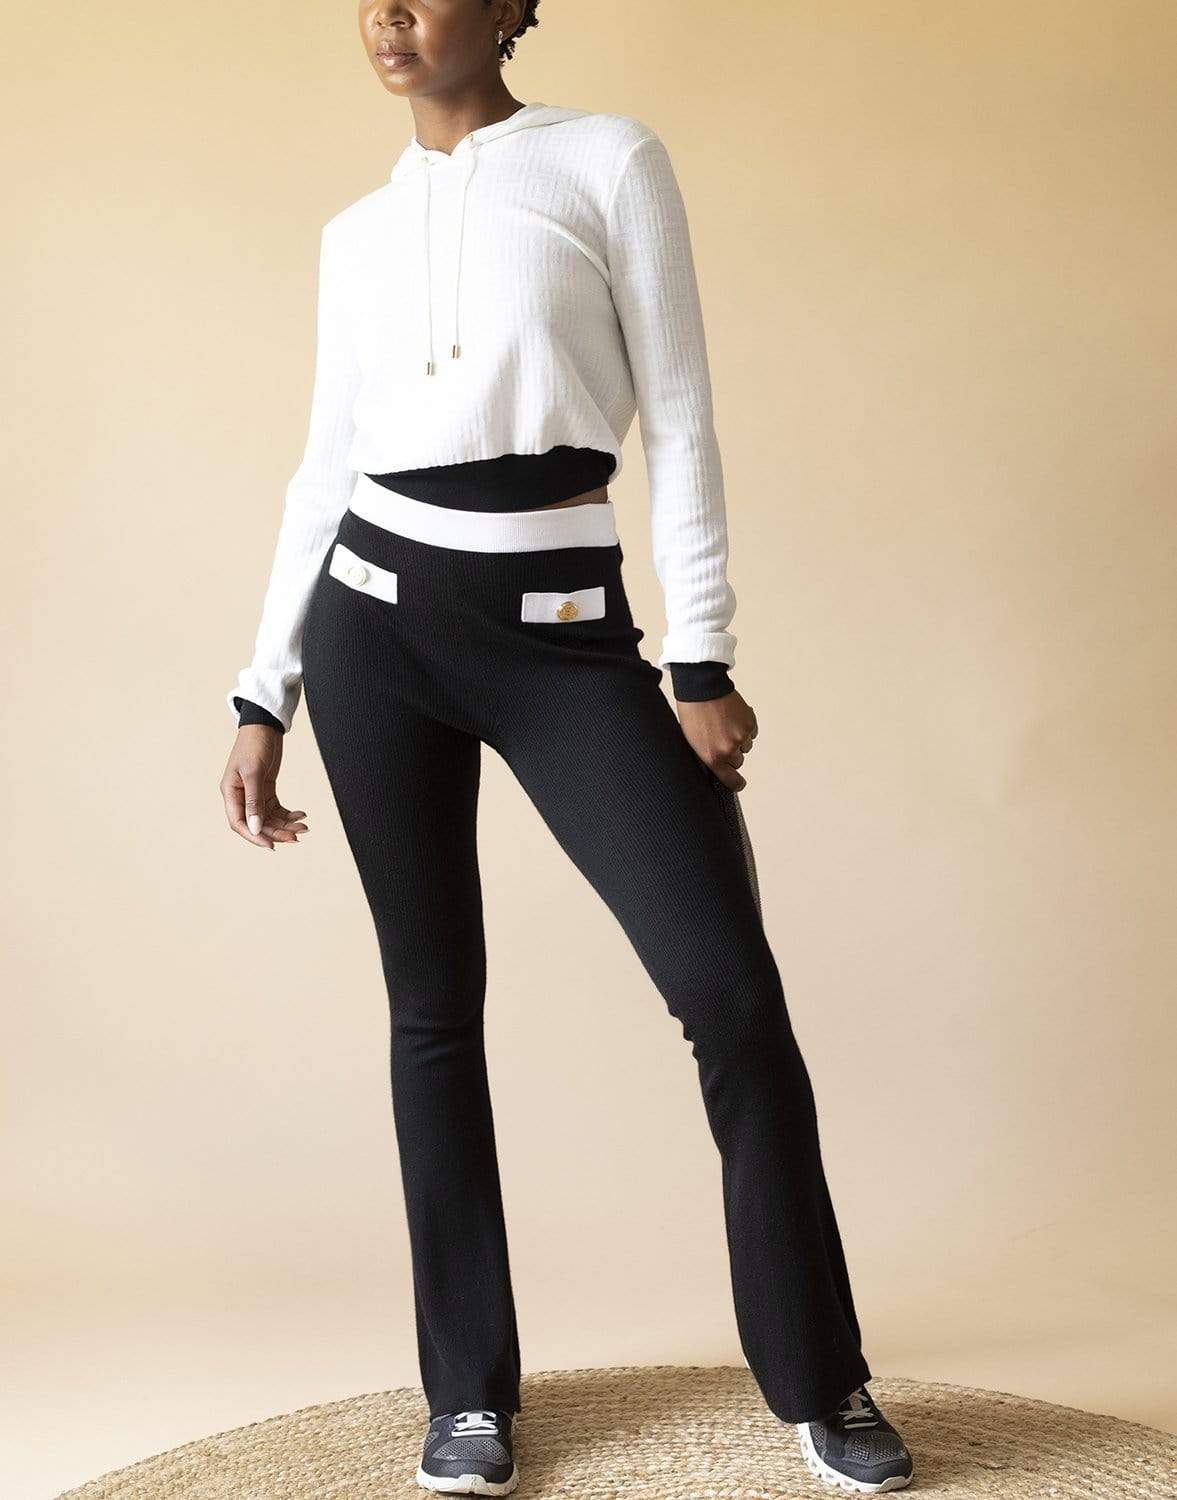 Bootcut Trousers – Marissa Collections